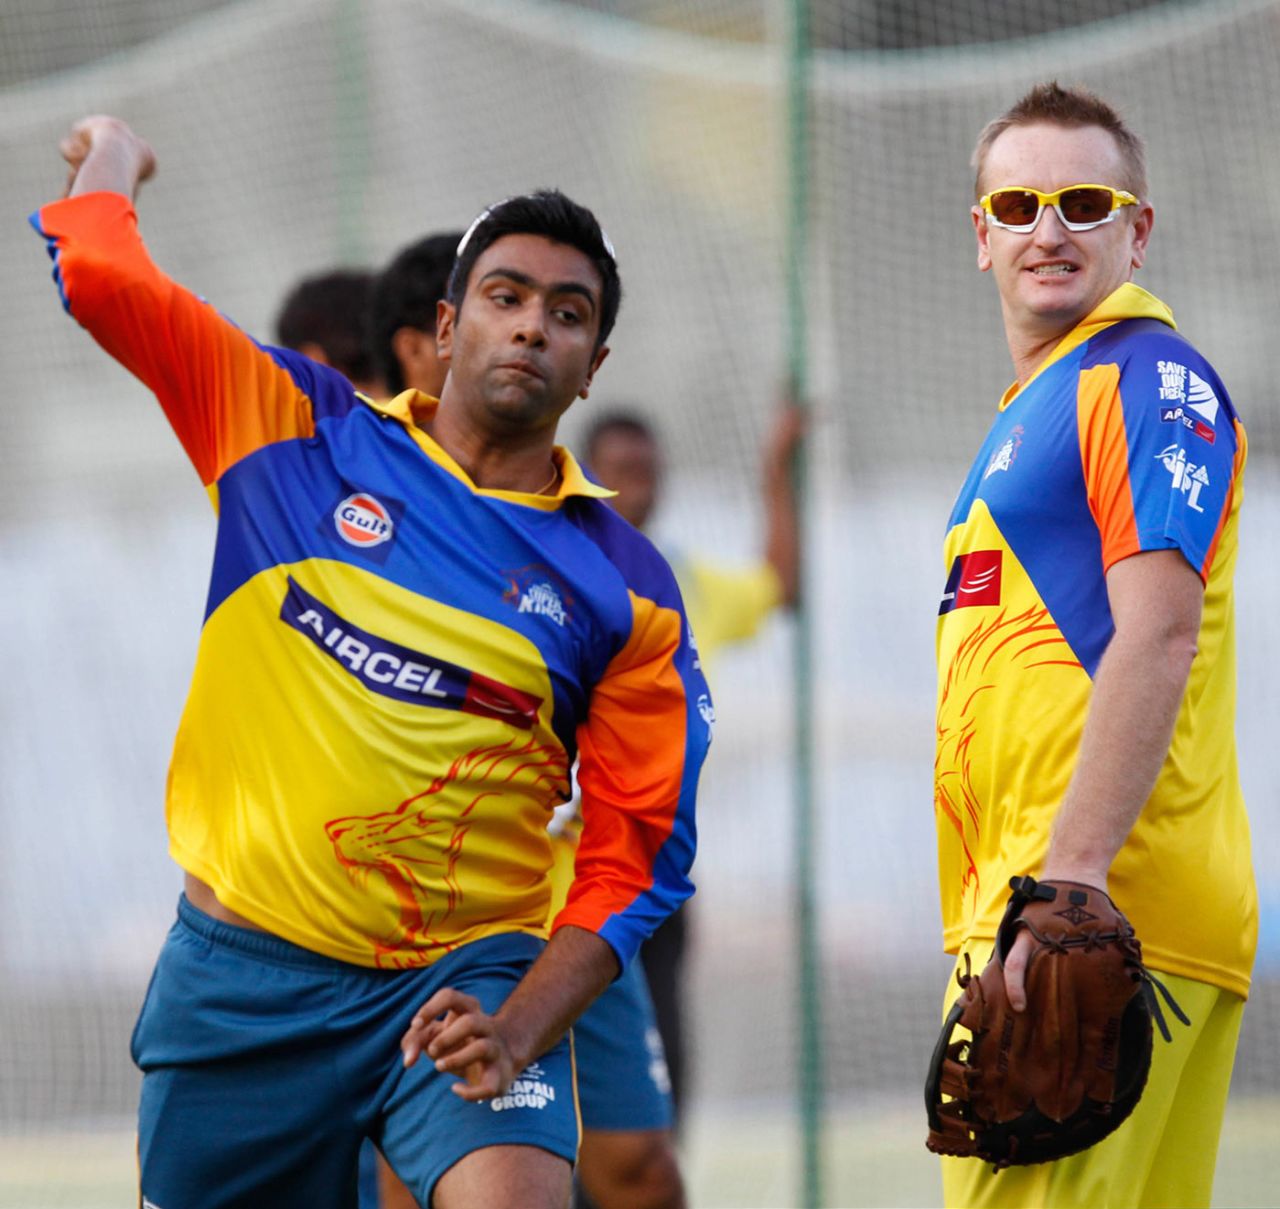 R Ashwin bowls at a practice session ahead of the IPL as Scott Styris looks on, Chennai, April 2, 2012